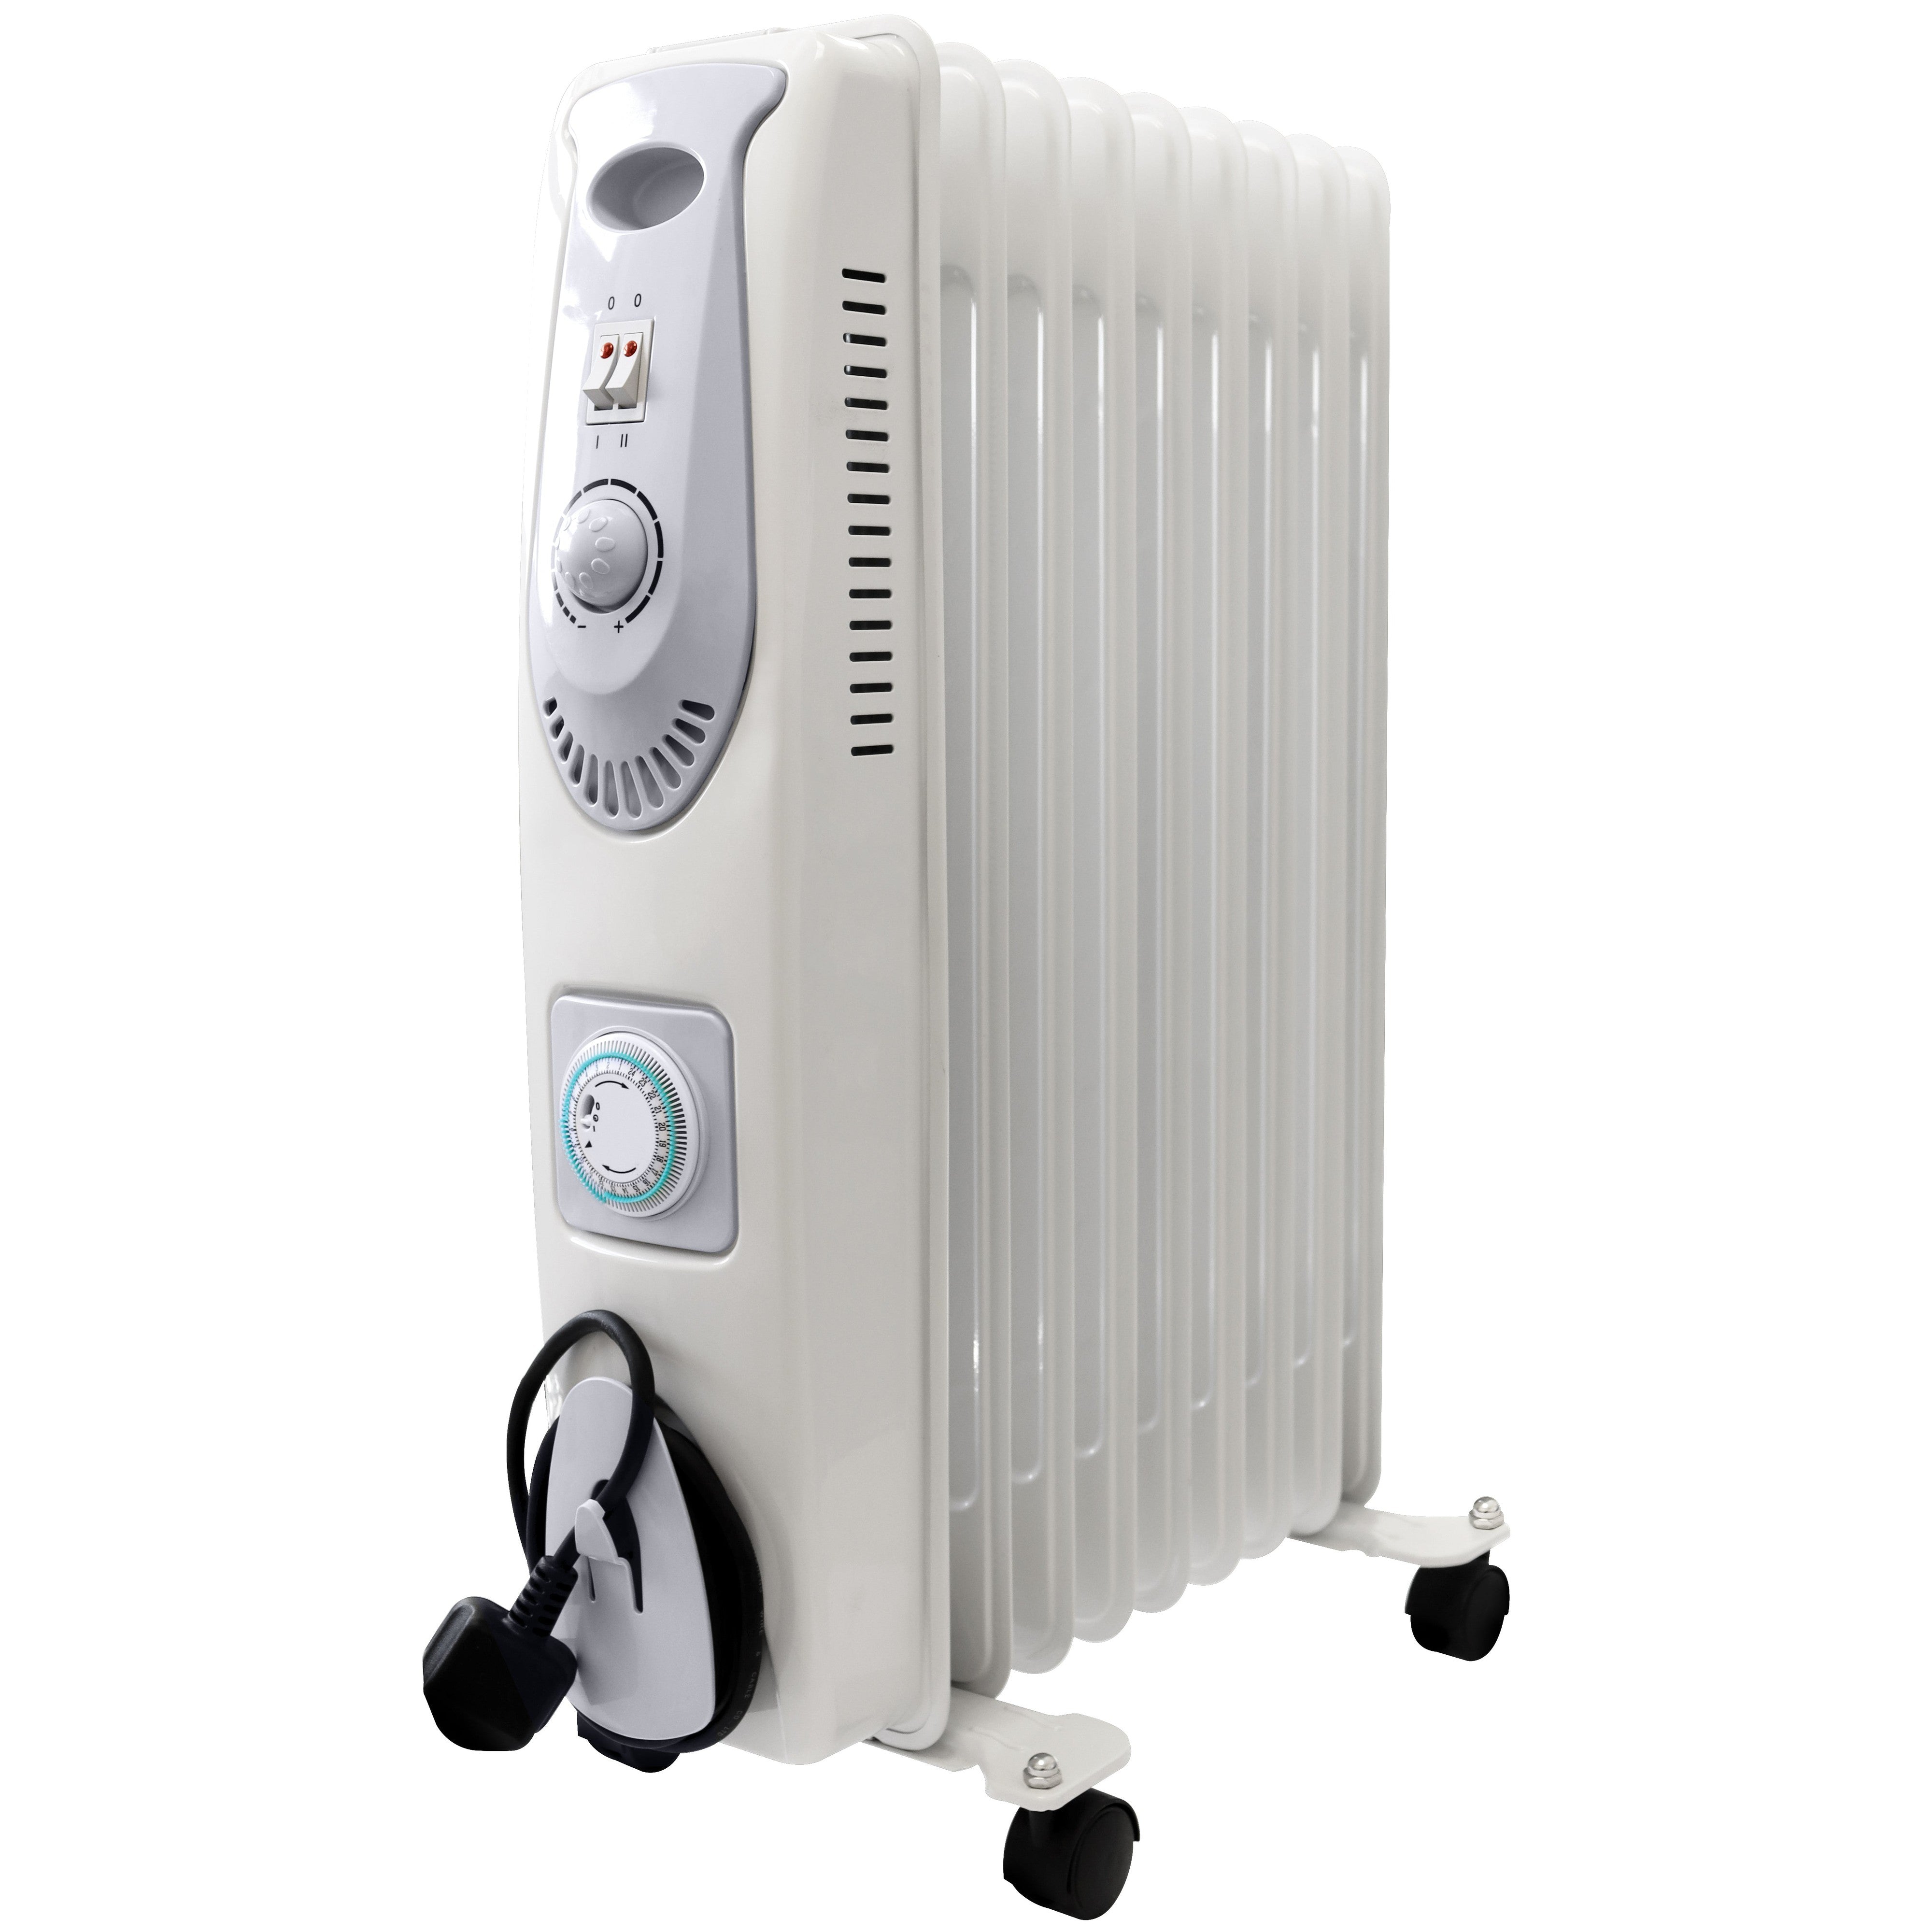 Eterna OILHT211T 2KW Oil Filled Heater With 24 Hour Timer